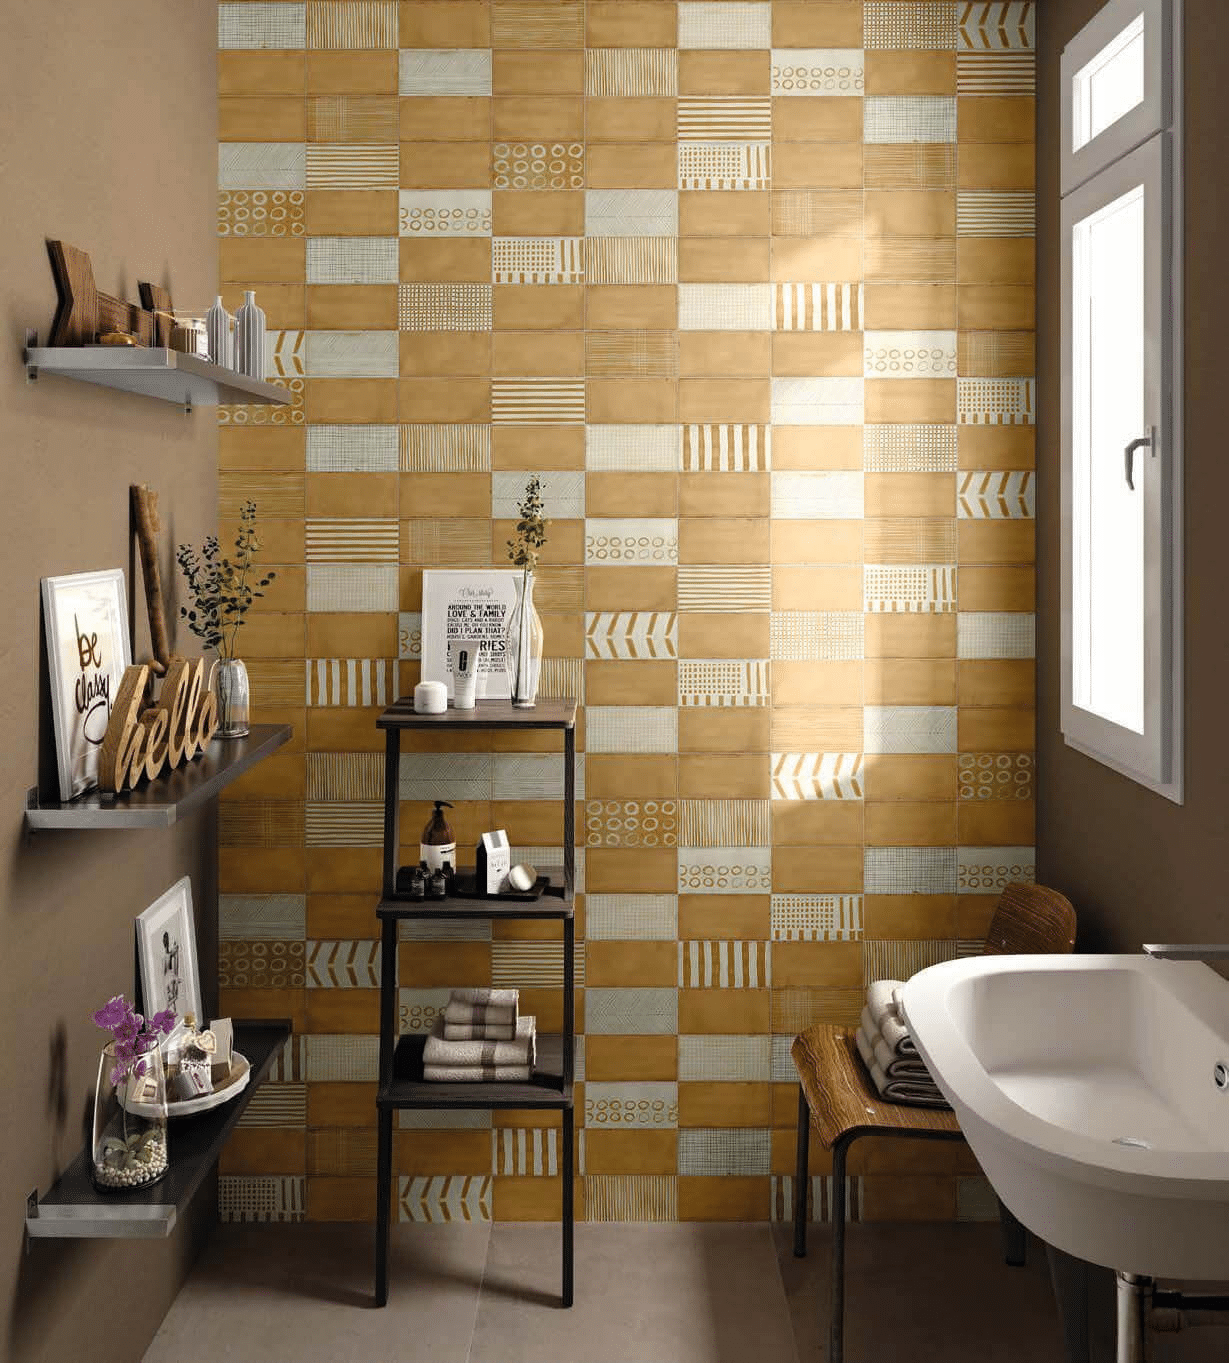 Bathroom with earthy yellow tile feature wall